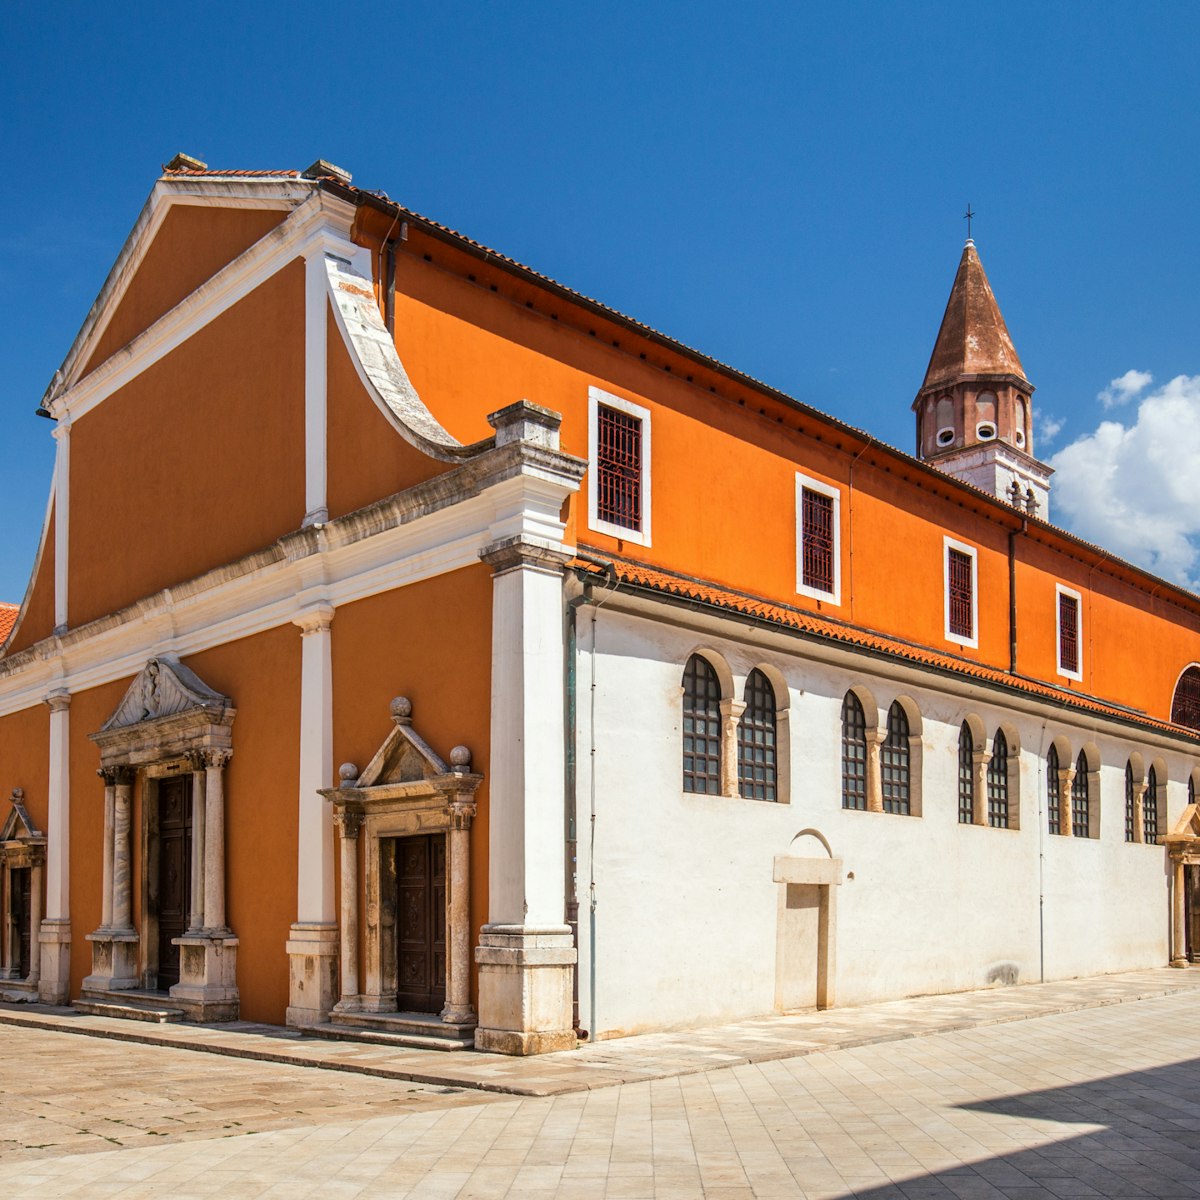 Historic center of the Croatian town of Zadar at the Mediterranean Sea, Church of St.Simeon, Europe.; Shutterstock ID 698125786; Your name (First / Last): Anna Tyler; GL account no.: 65050; Netsuite department name: Online Editorial; Full Product or Project name including edition: destination-image-southern-europe